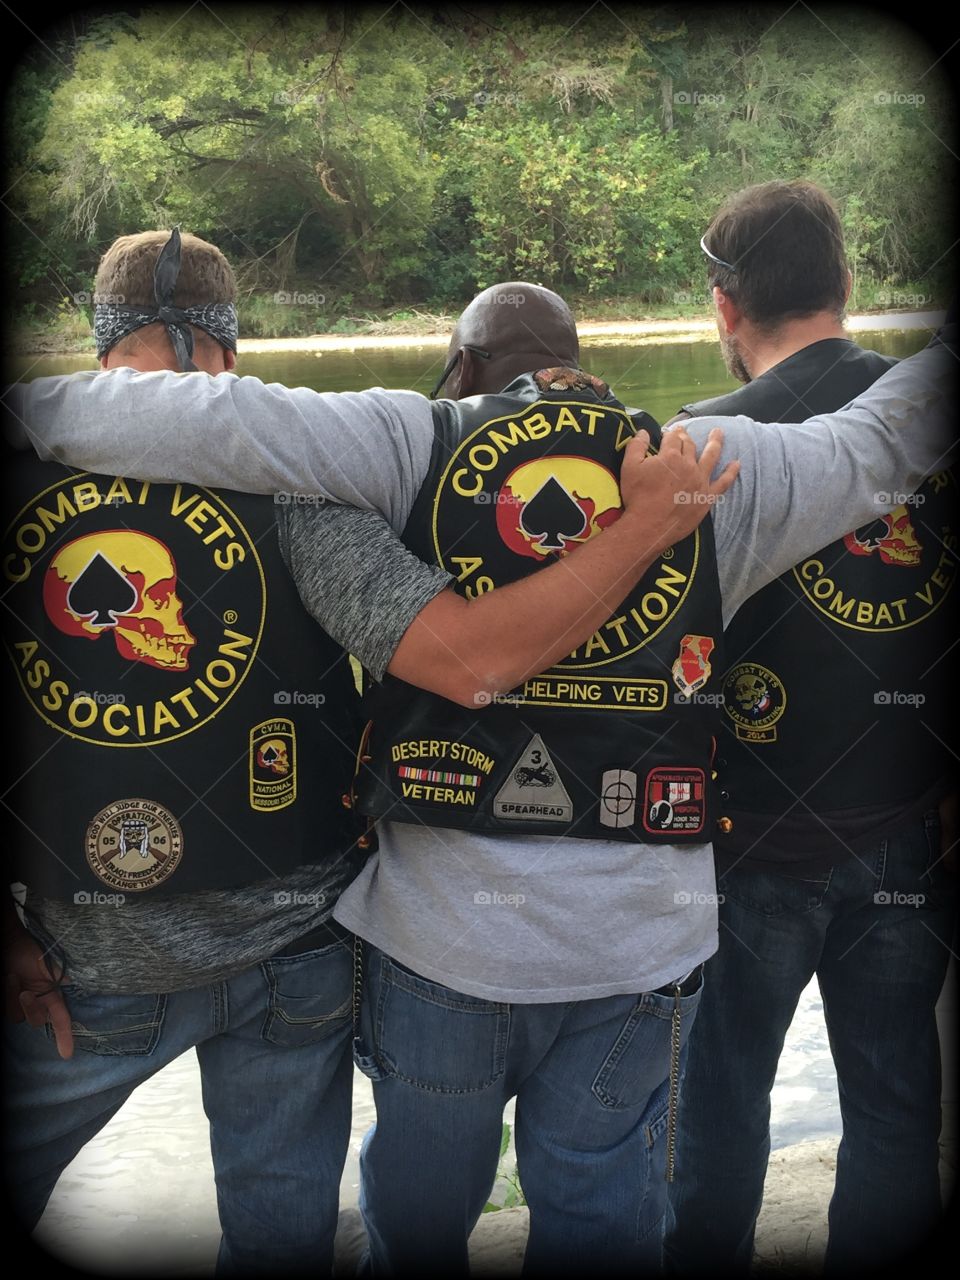 Brothers . three members of the chapter 23–9 combat veterans motorcycle group having a hug